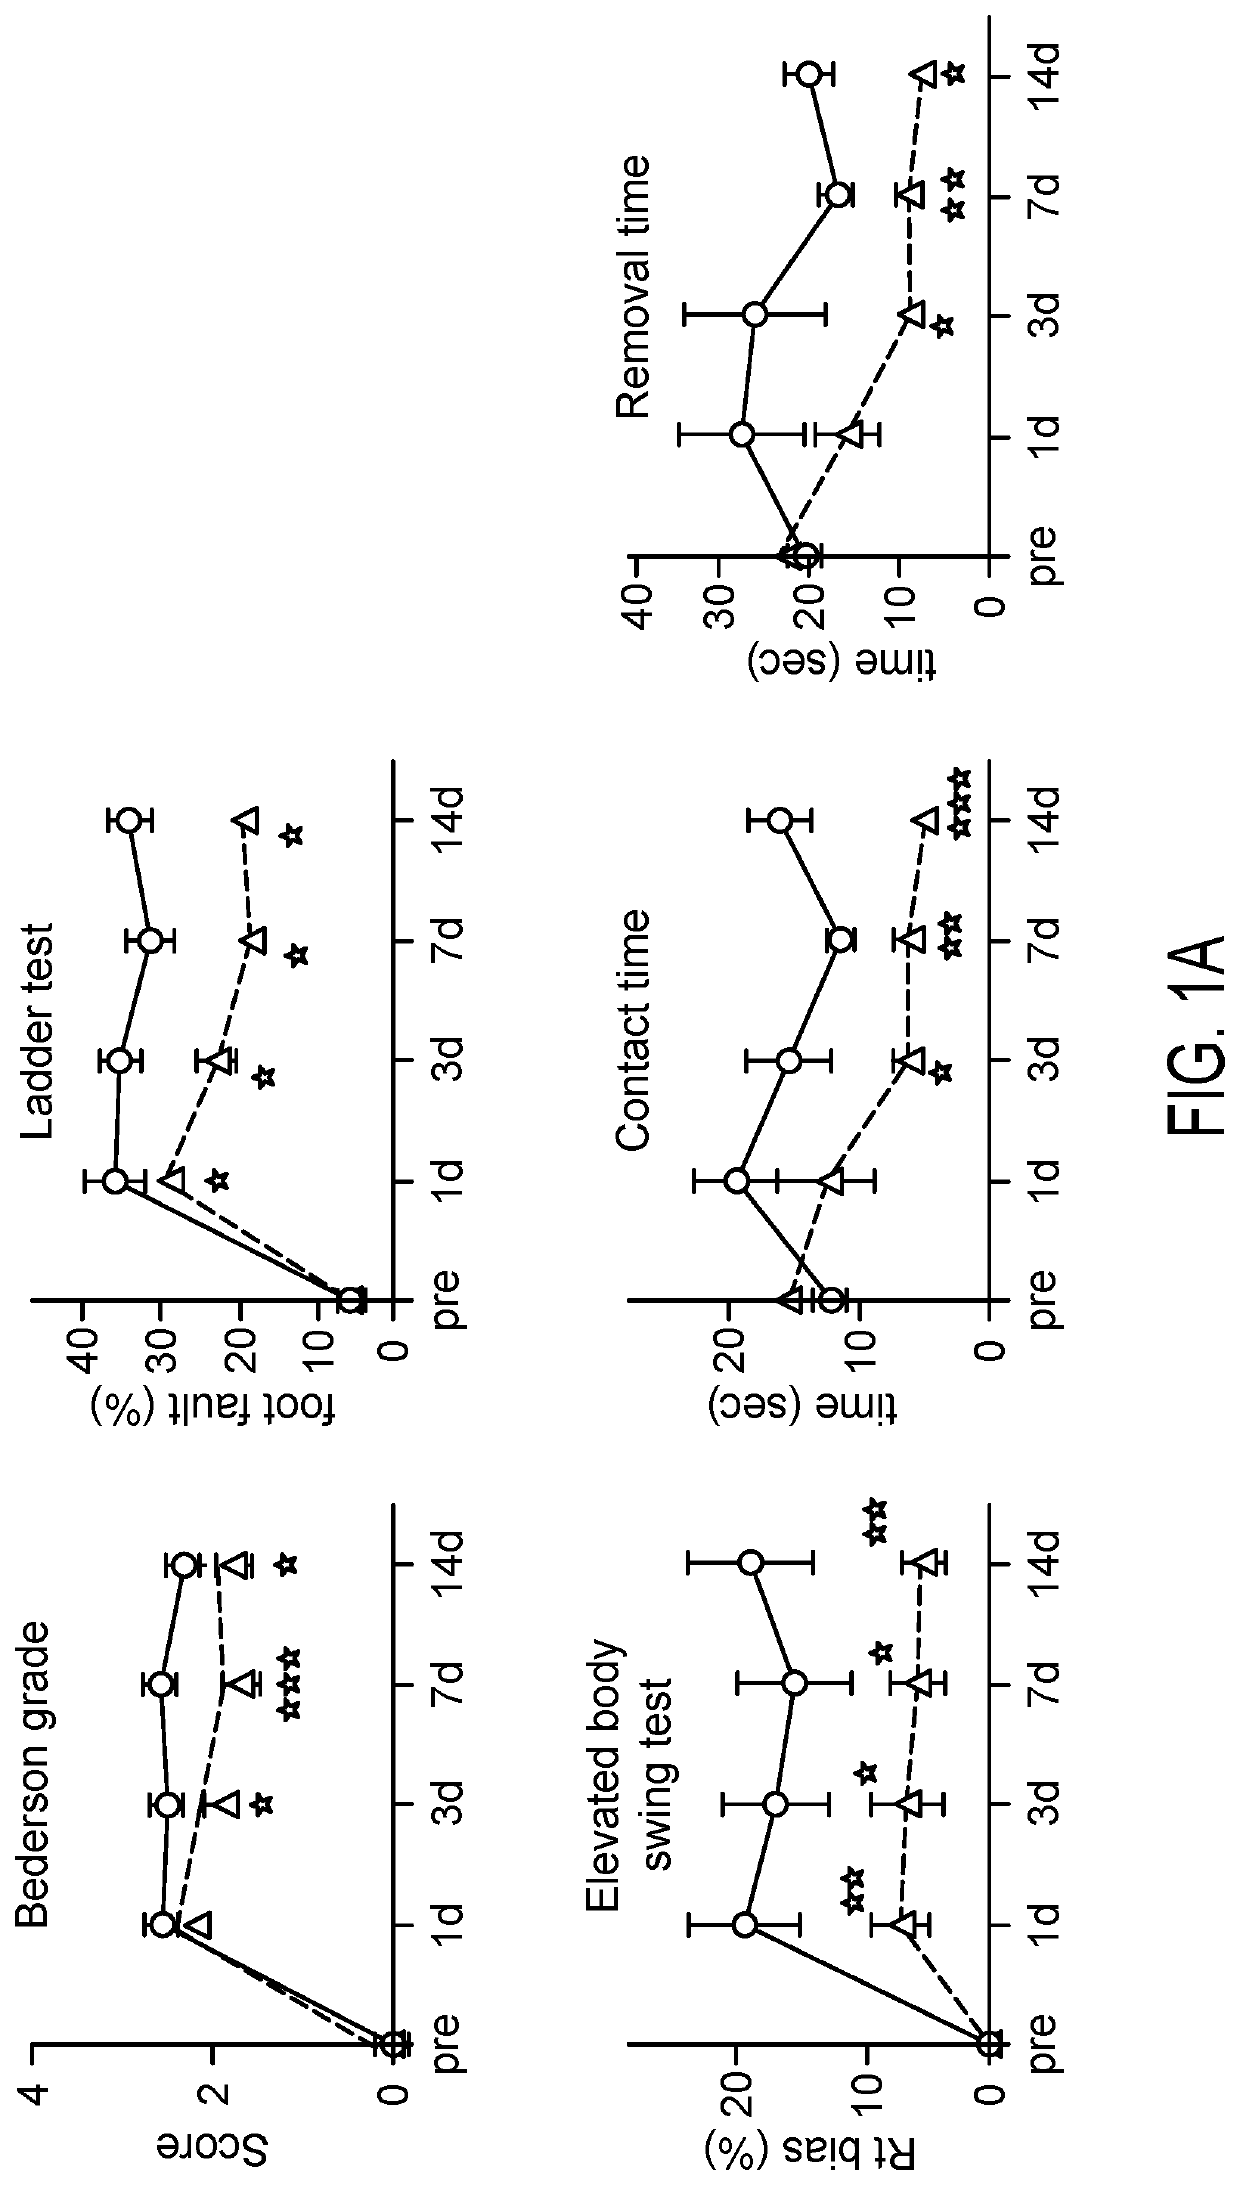 Treatment of Vascular Occlusion by Activation of Notch Signaling